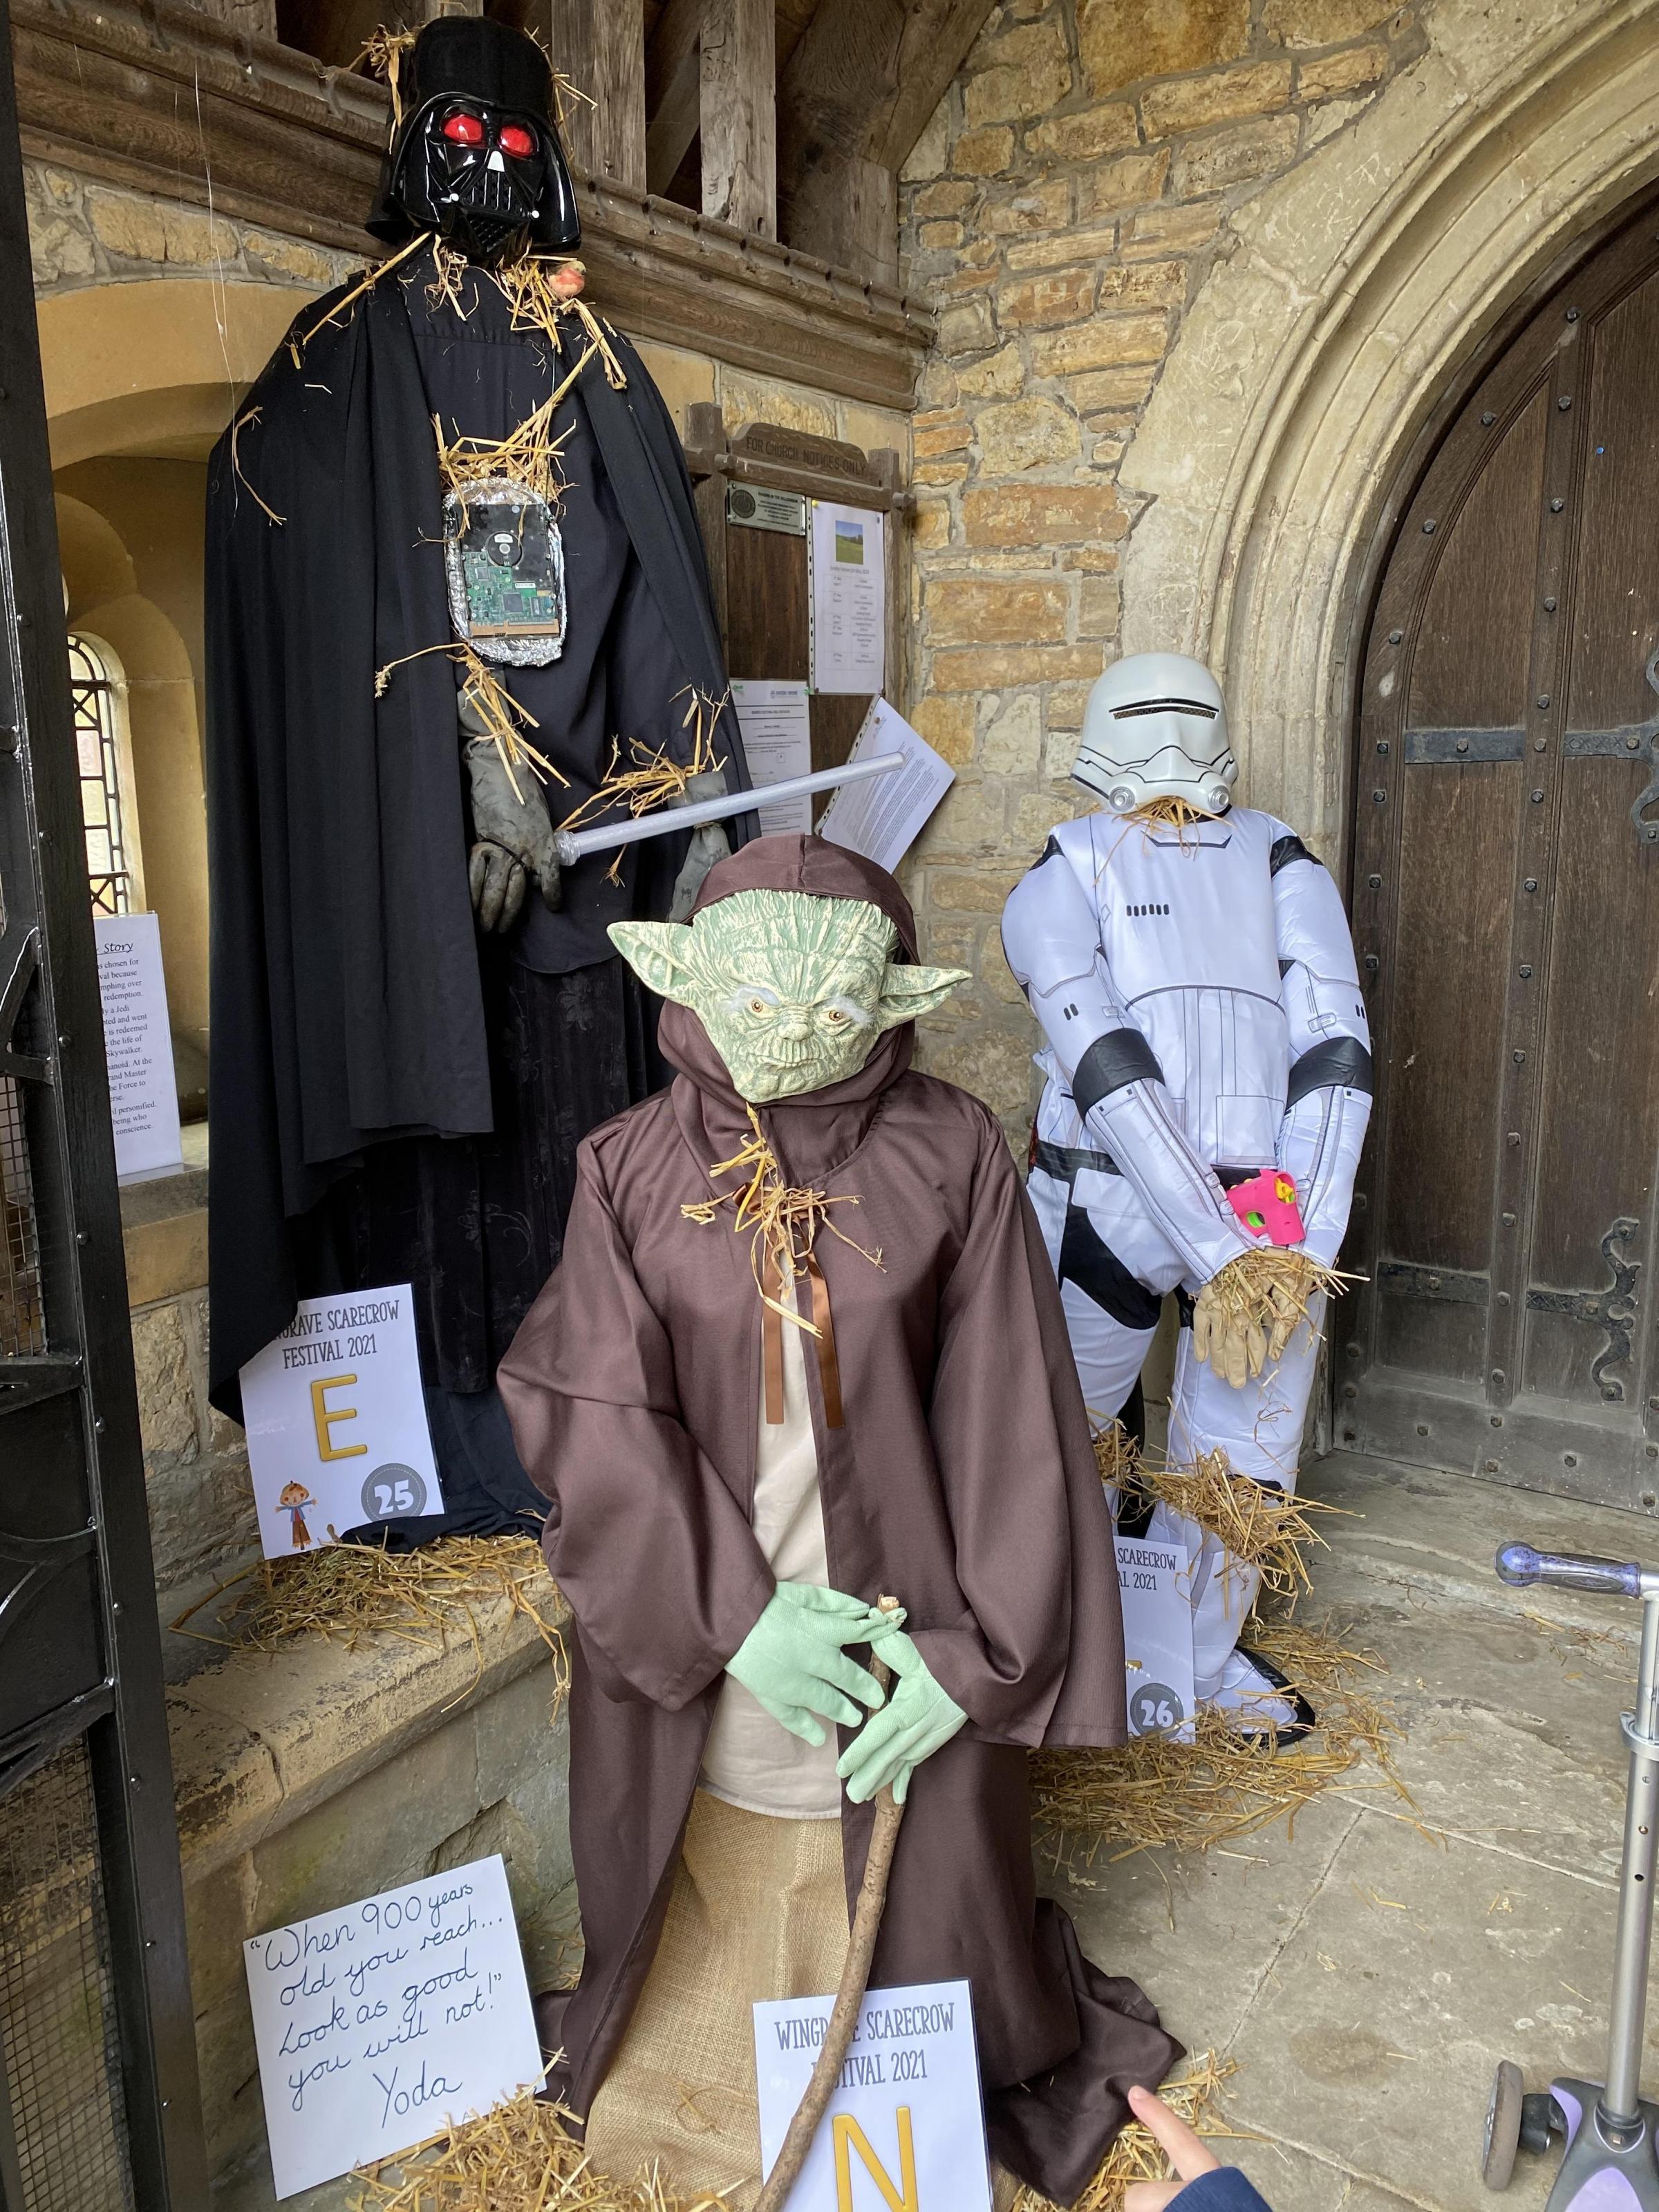 There were 38 scarecrows on offer 